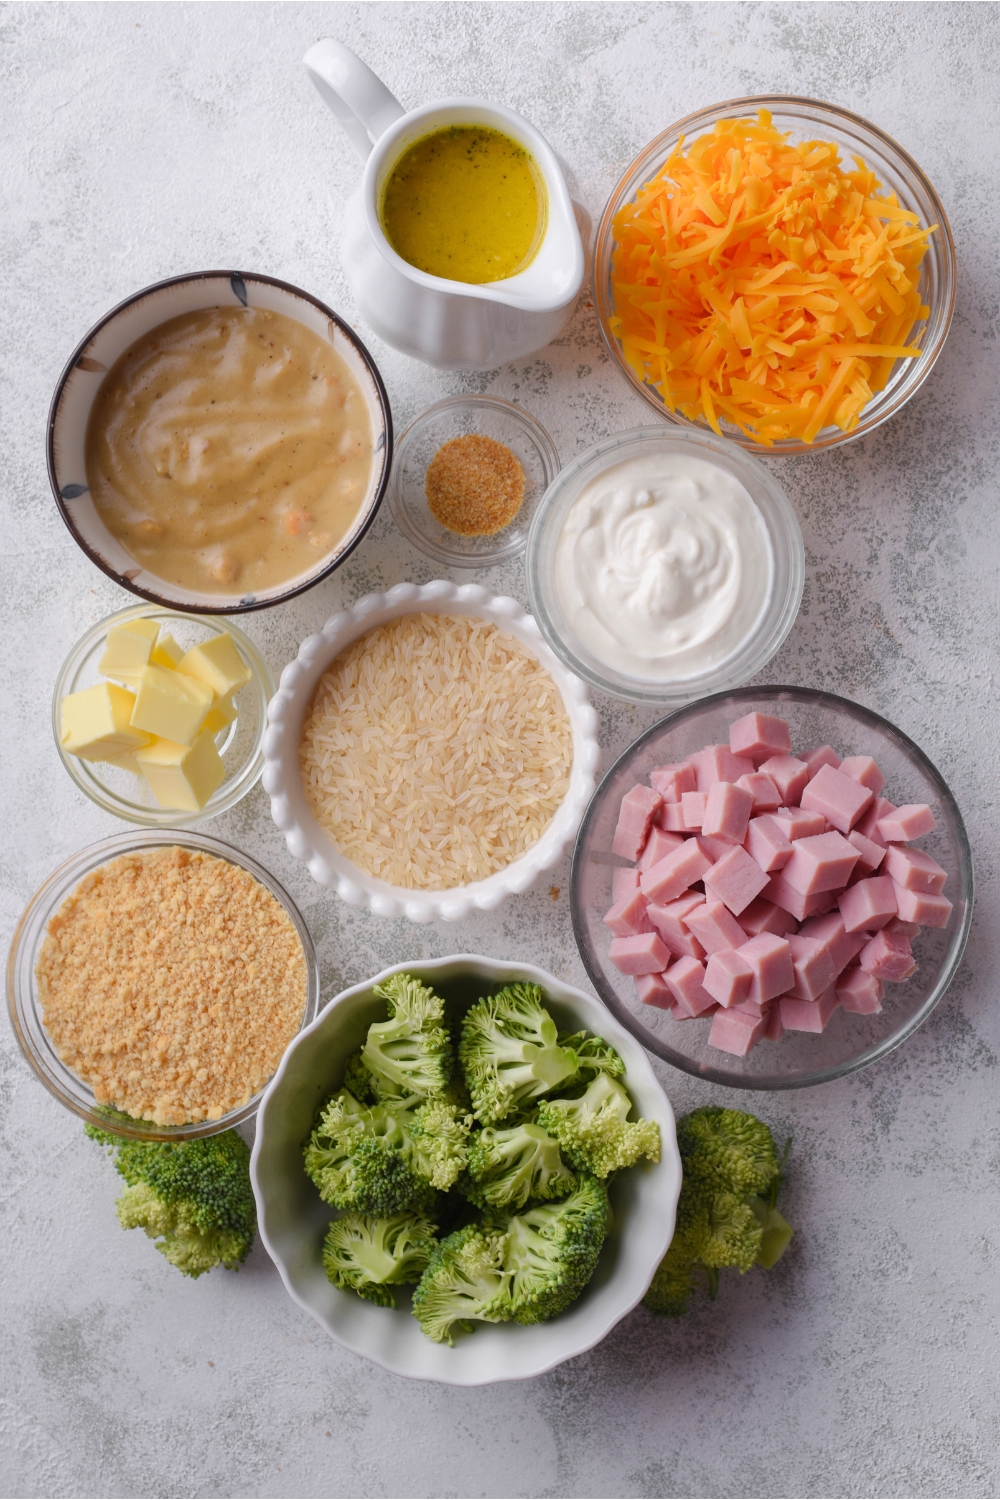 An assortment of ingredients including bowls of shredded cheese, broccoli, diced ham, crushed crackers, condensed soup, butter, and spices.